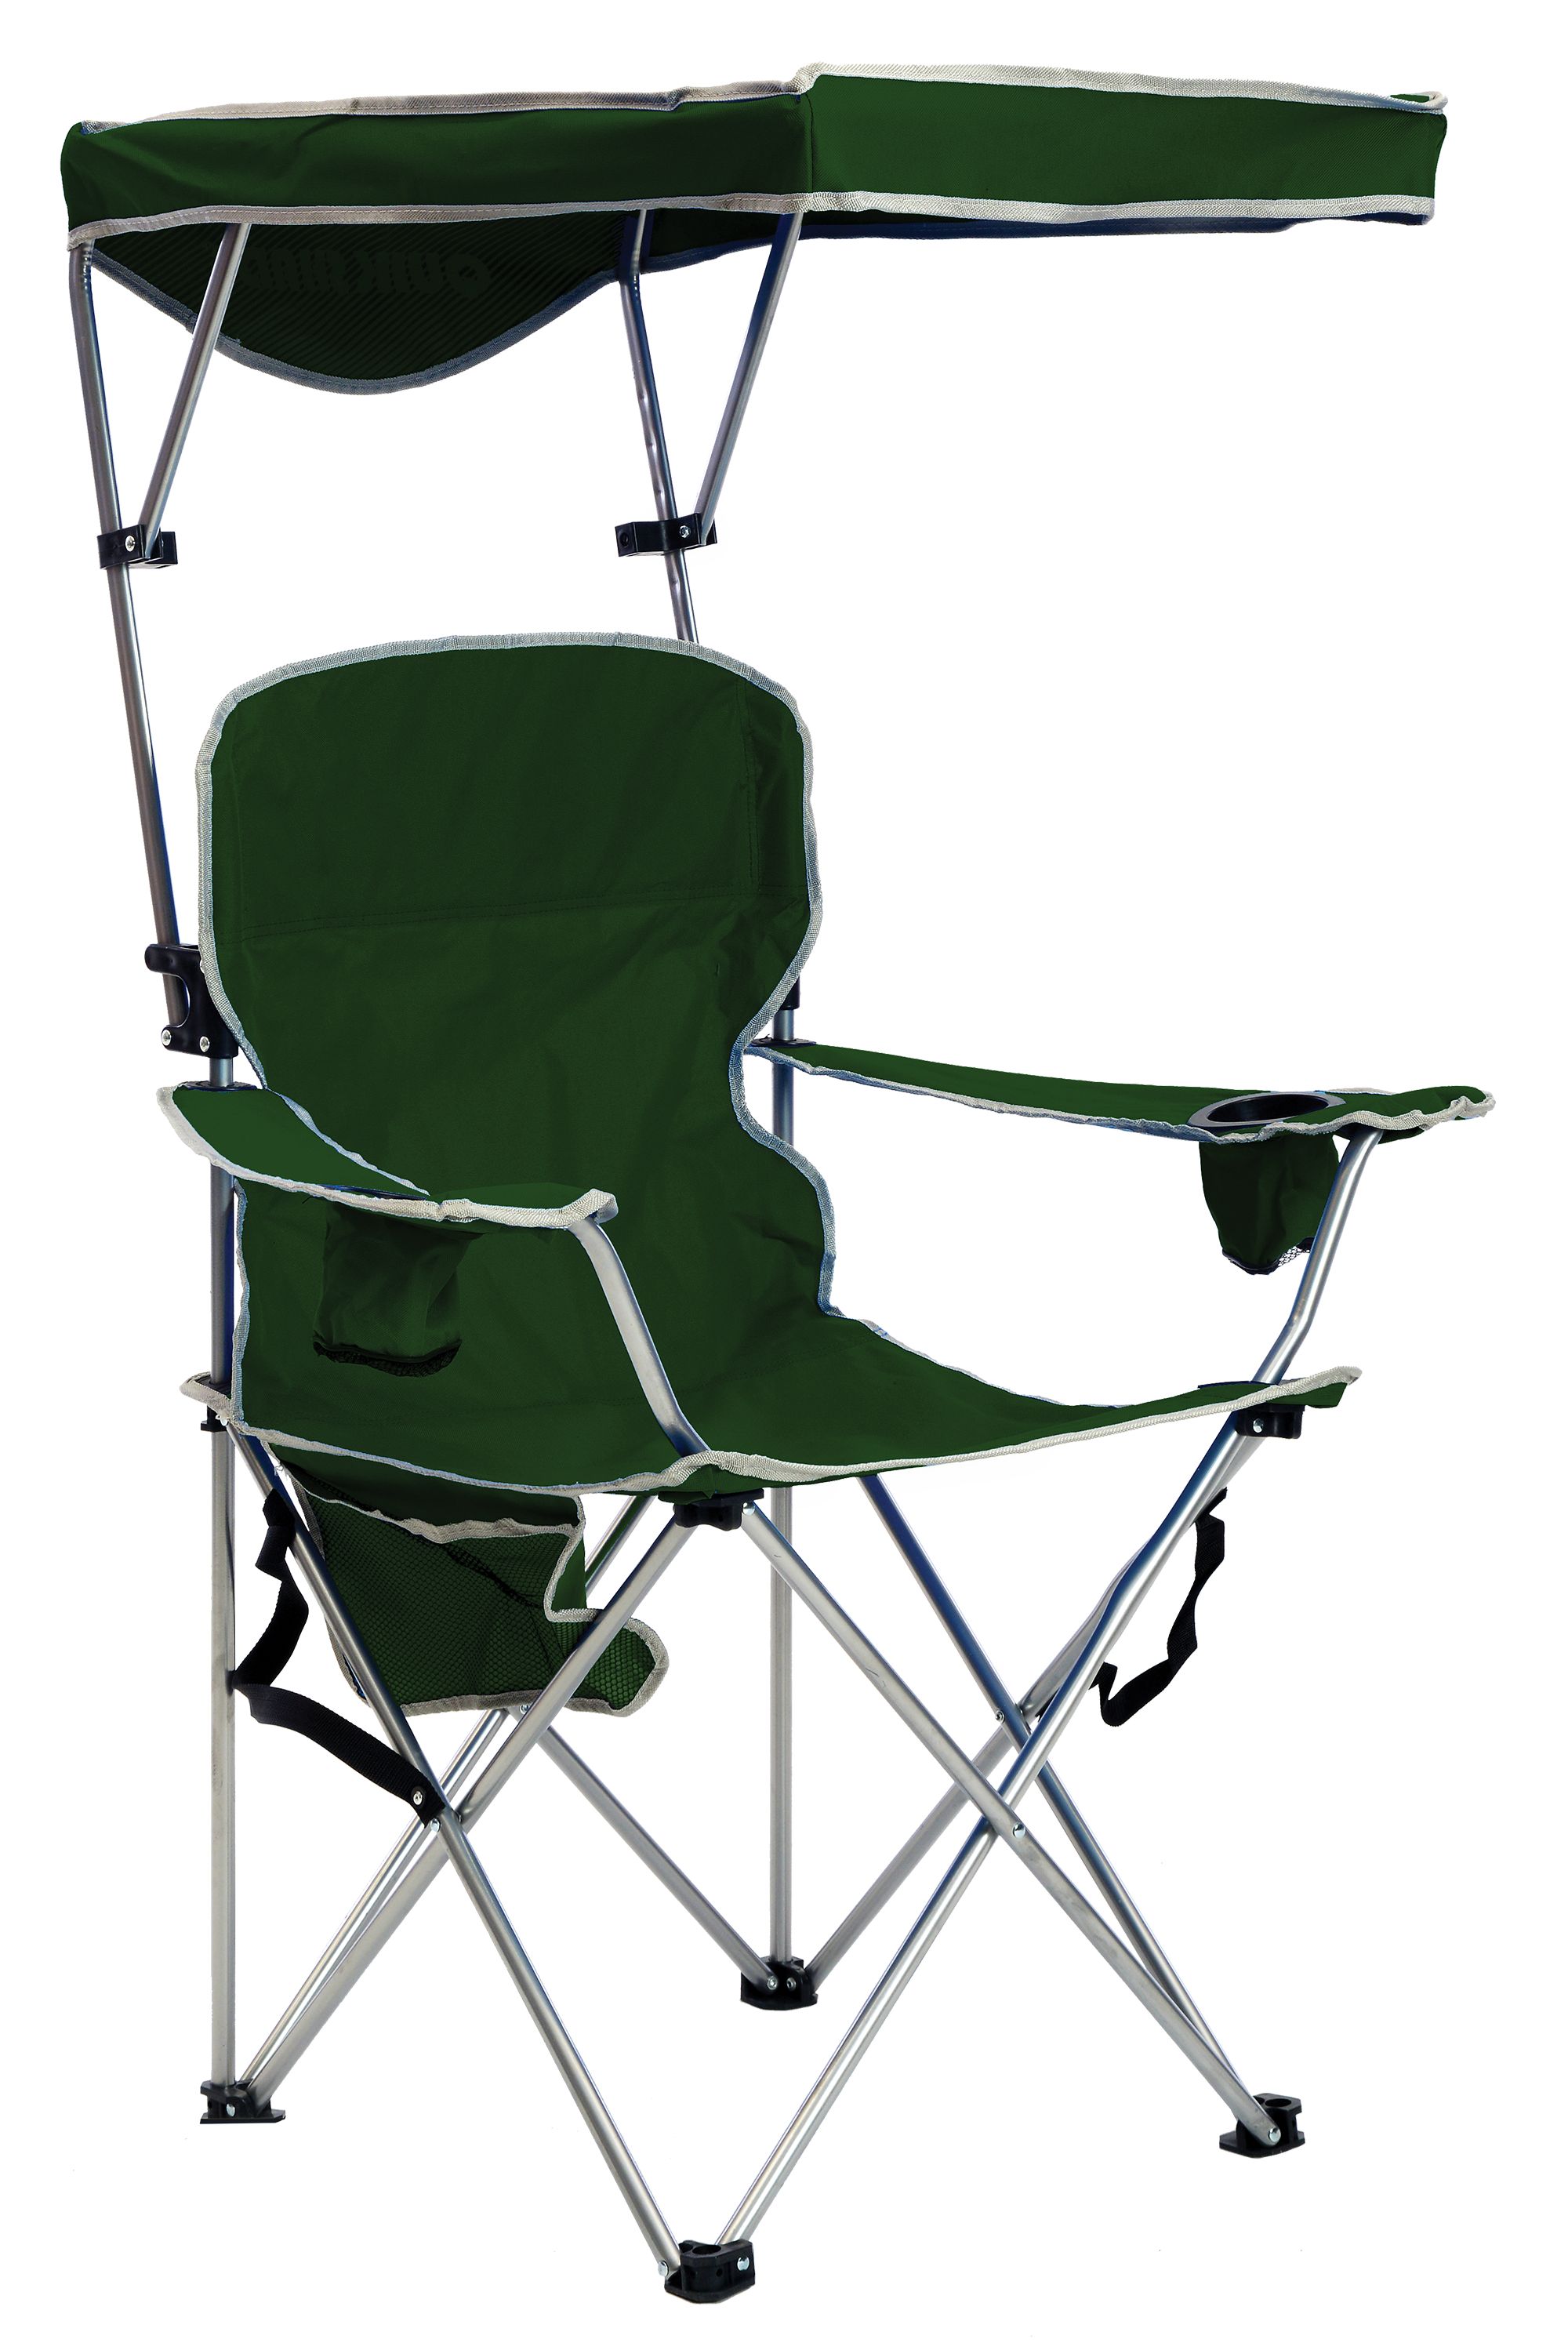 Quik Shade Full Size Folding Chair, Forest Green, Lawn Chairs - image 1 of 5